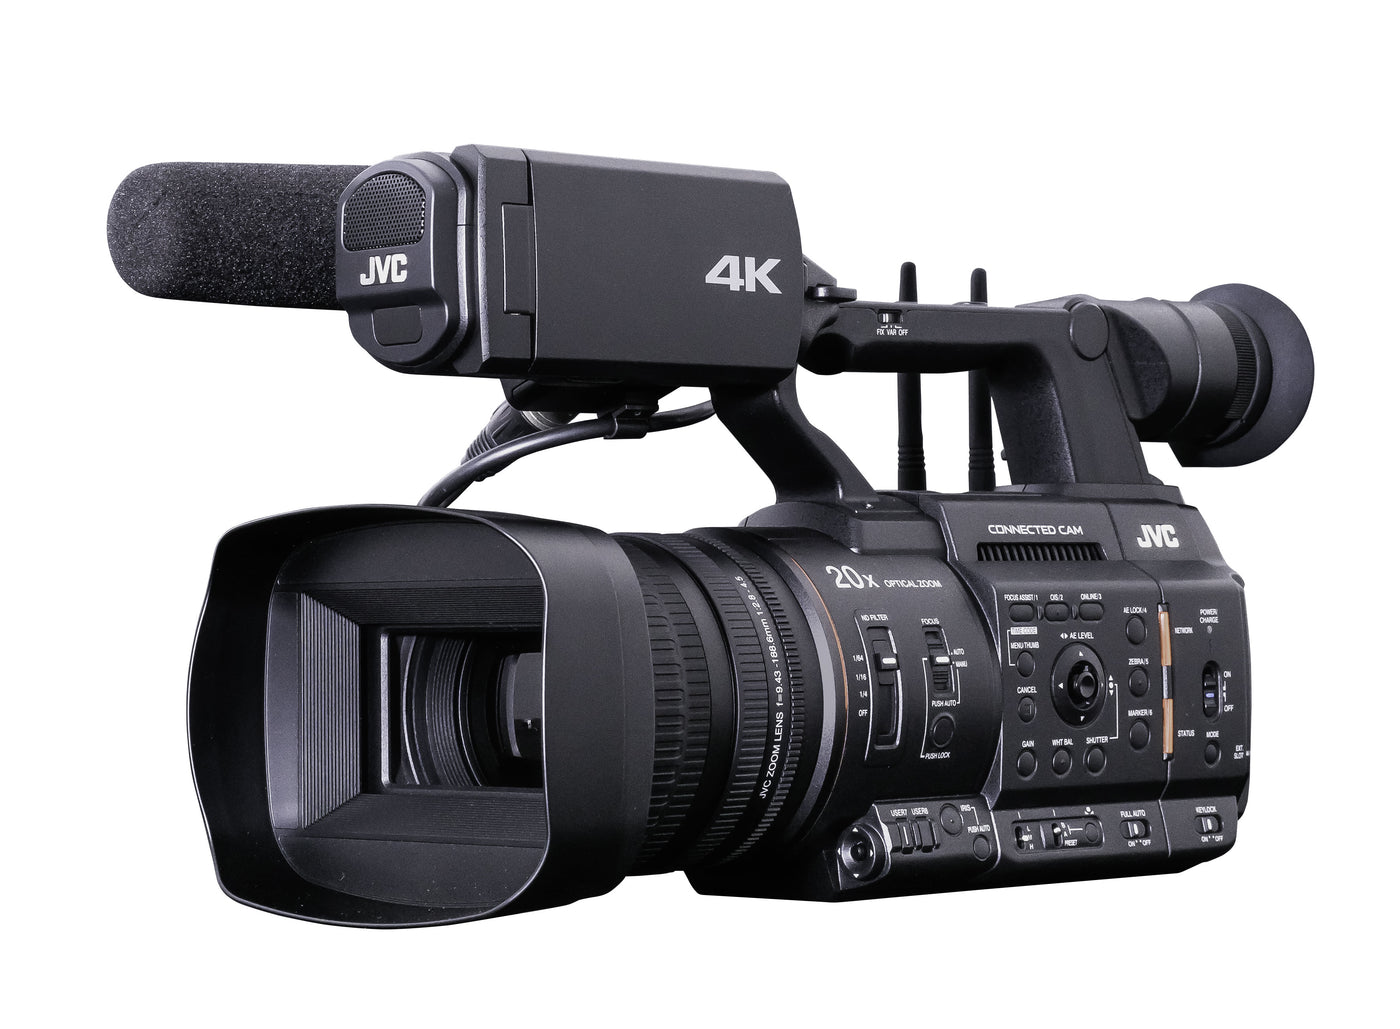 JVC Professional GY-HC550UN CONNECTED CAM Handheld 4K 1-Inch Broadcast Camcorder with NDI®|HX